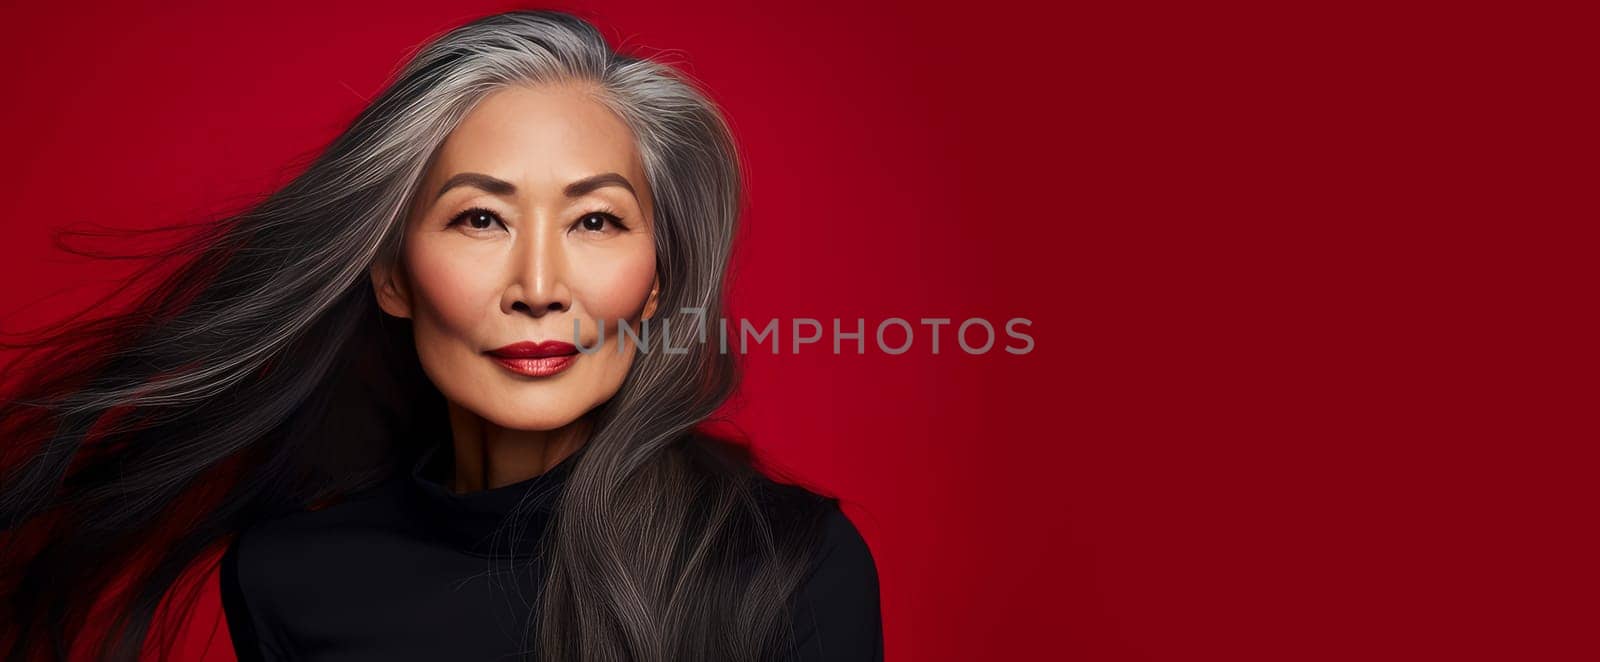 Smiling, elderly, gorgeous Asian woman gray long hair and perfect skin, on a red background, banner. Advertising of cosmetic products, spa treatments, shampoos and hair care products, dentistry and medicine, perfumes and cosmetology for senior women